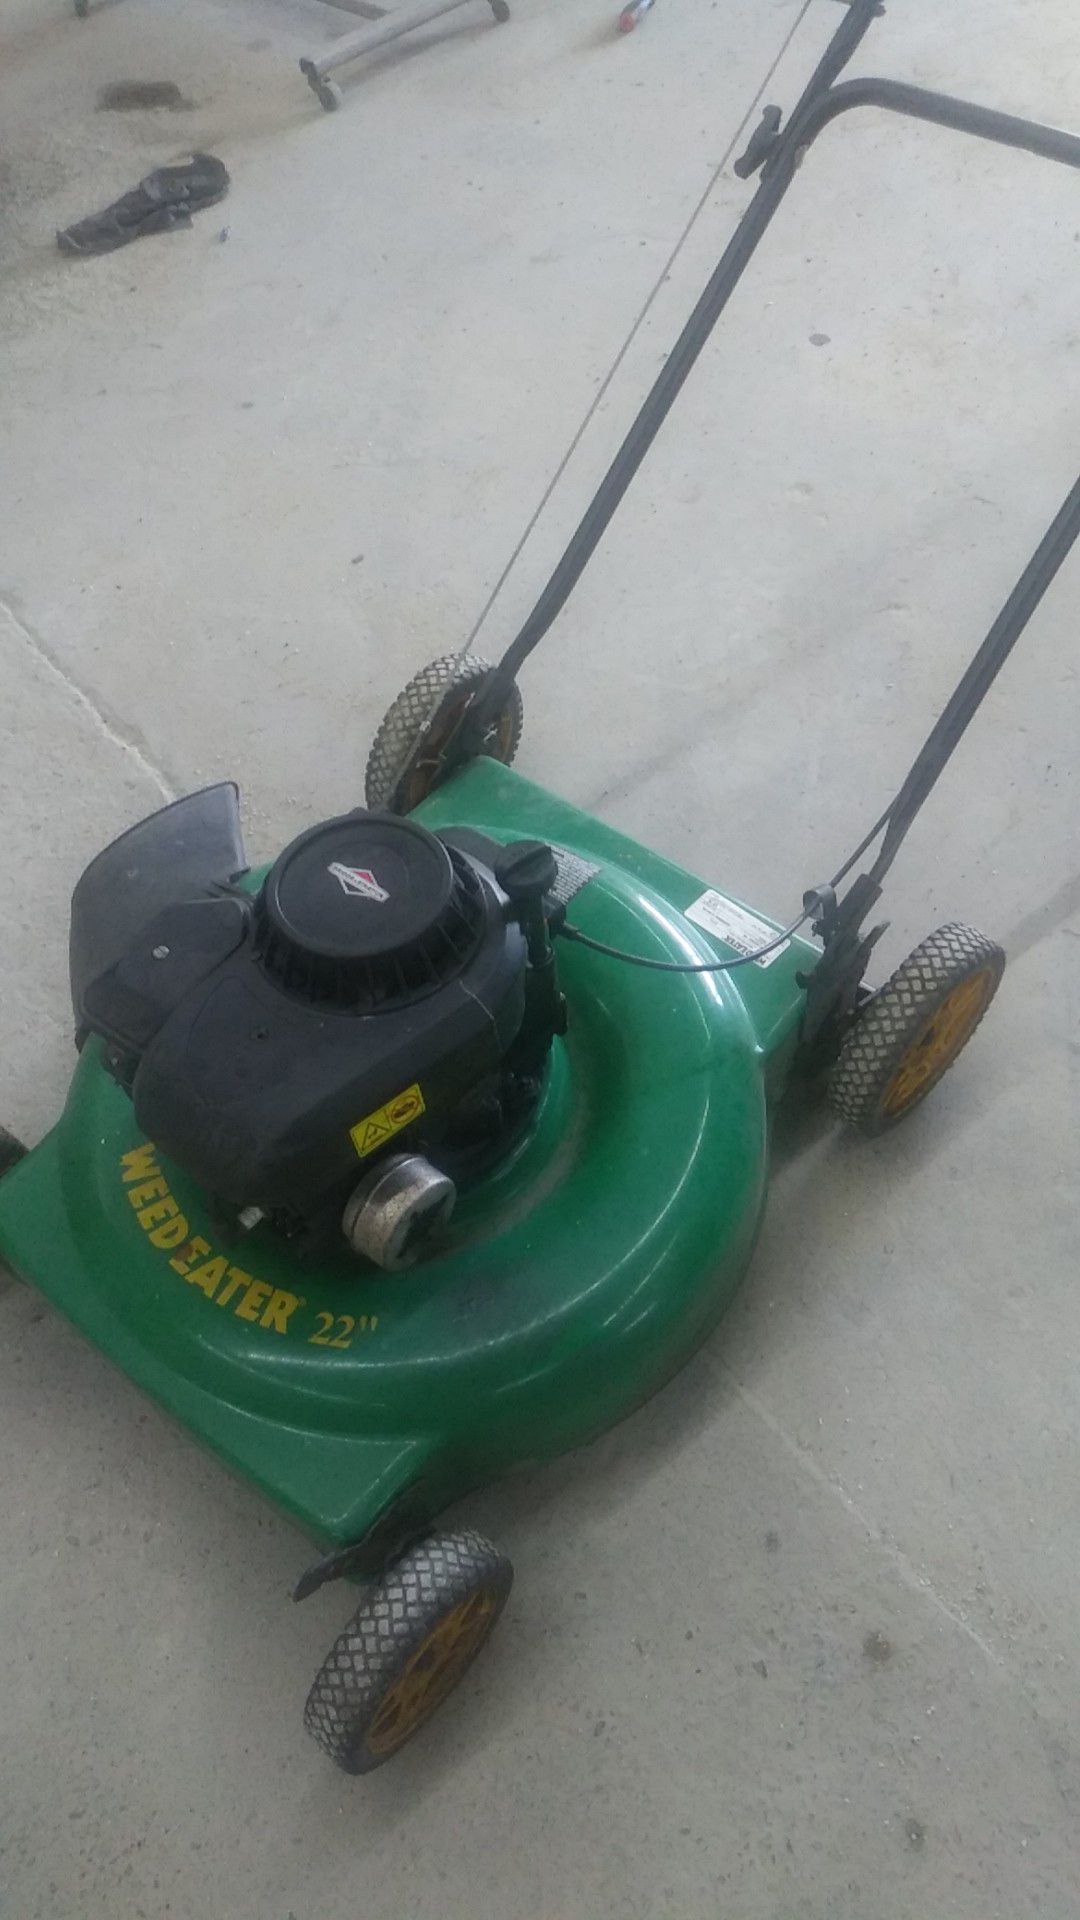 Very nice push mower with just four wheels Briggs & Stratton weed eater